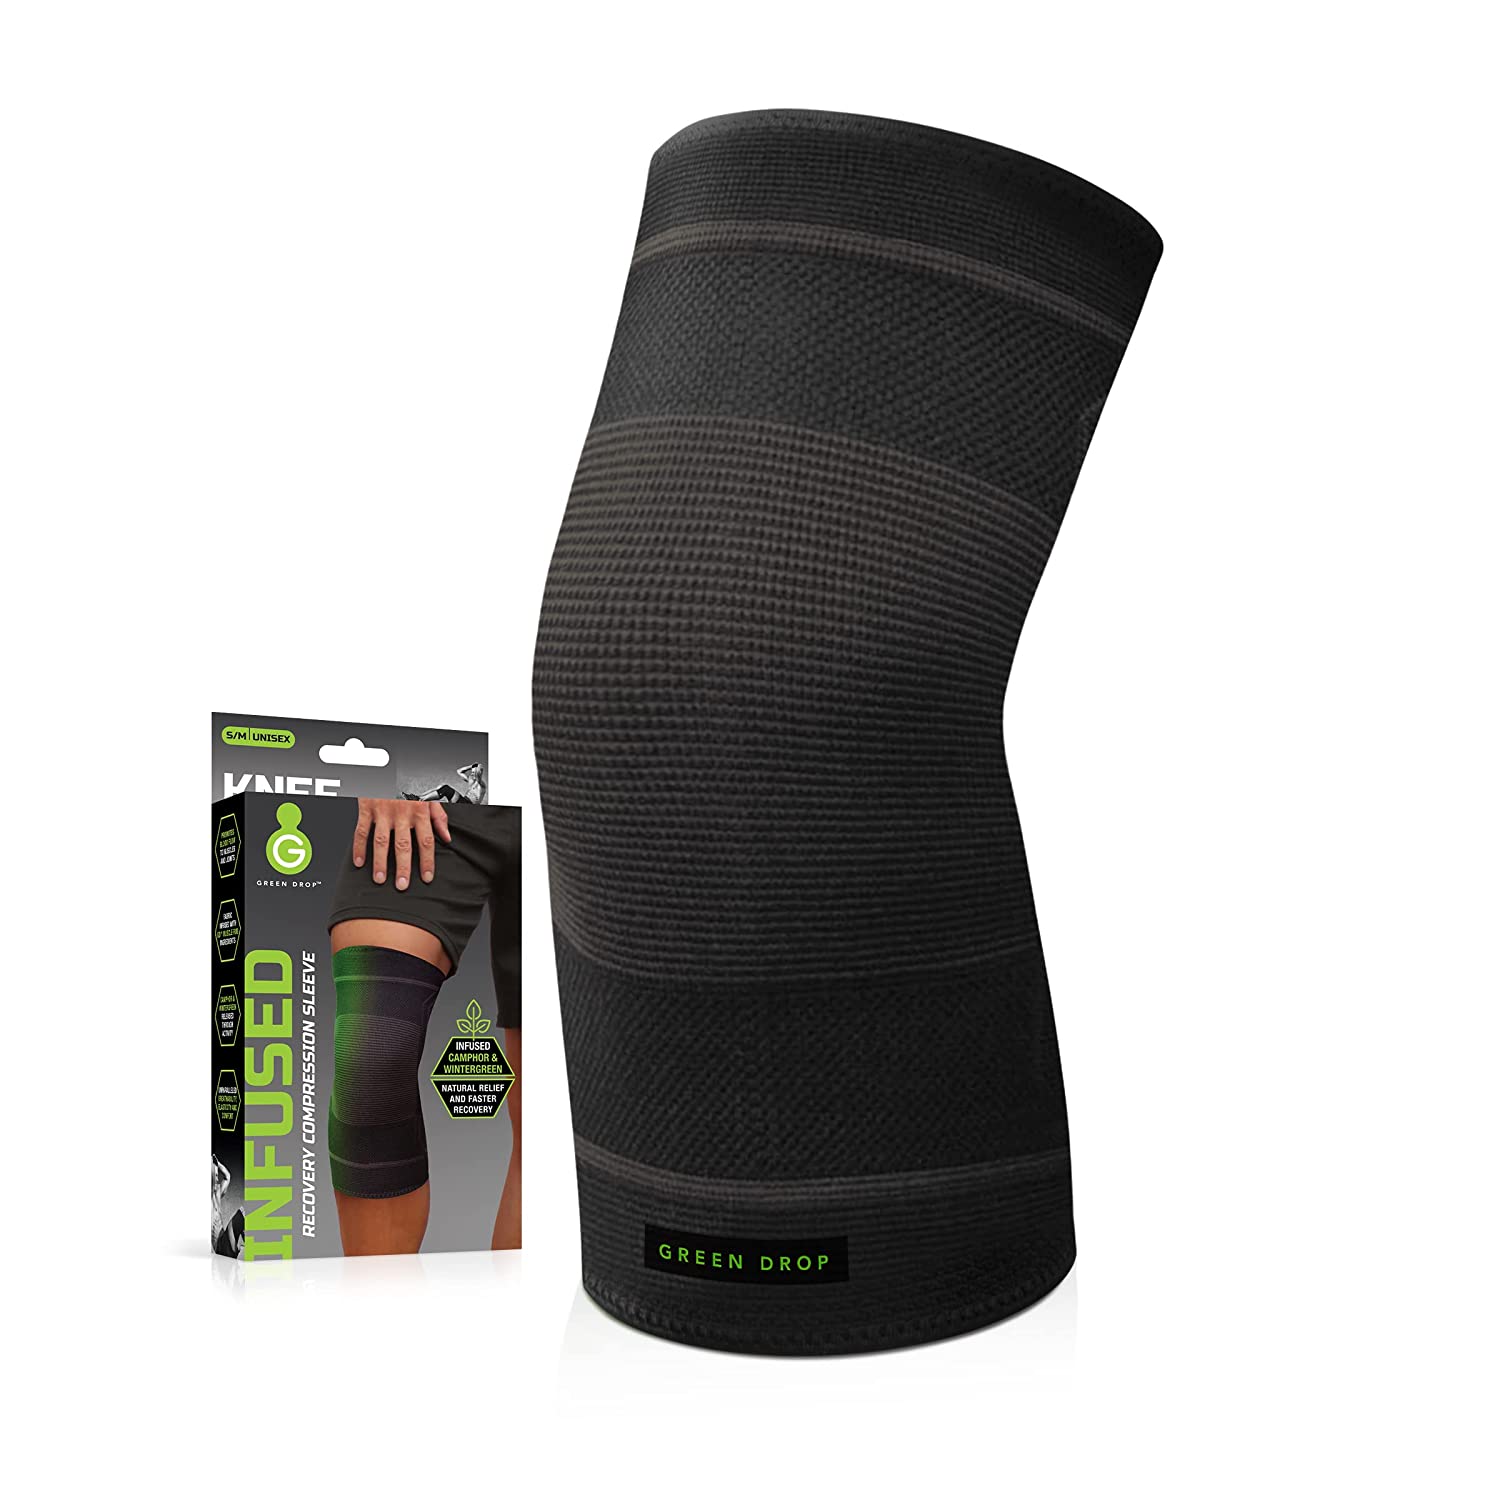 Knee Compression Sleeves in Sports Medicine 